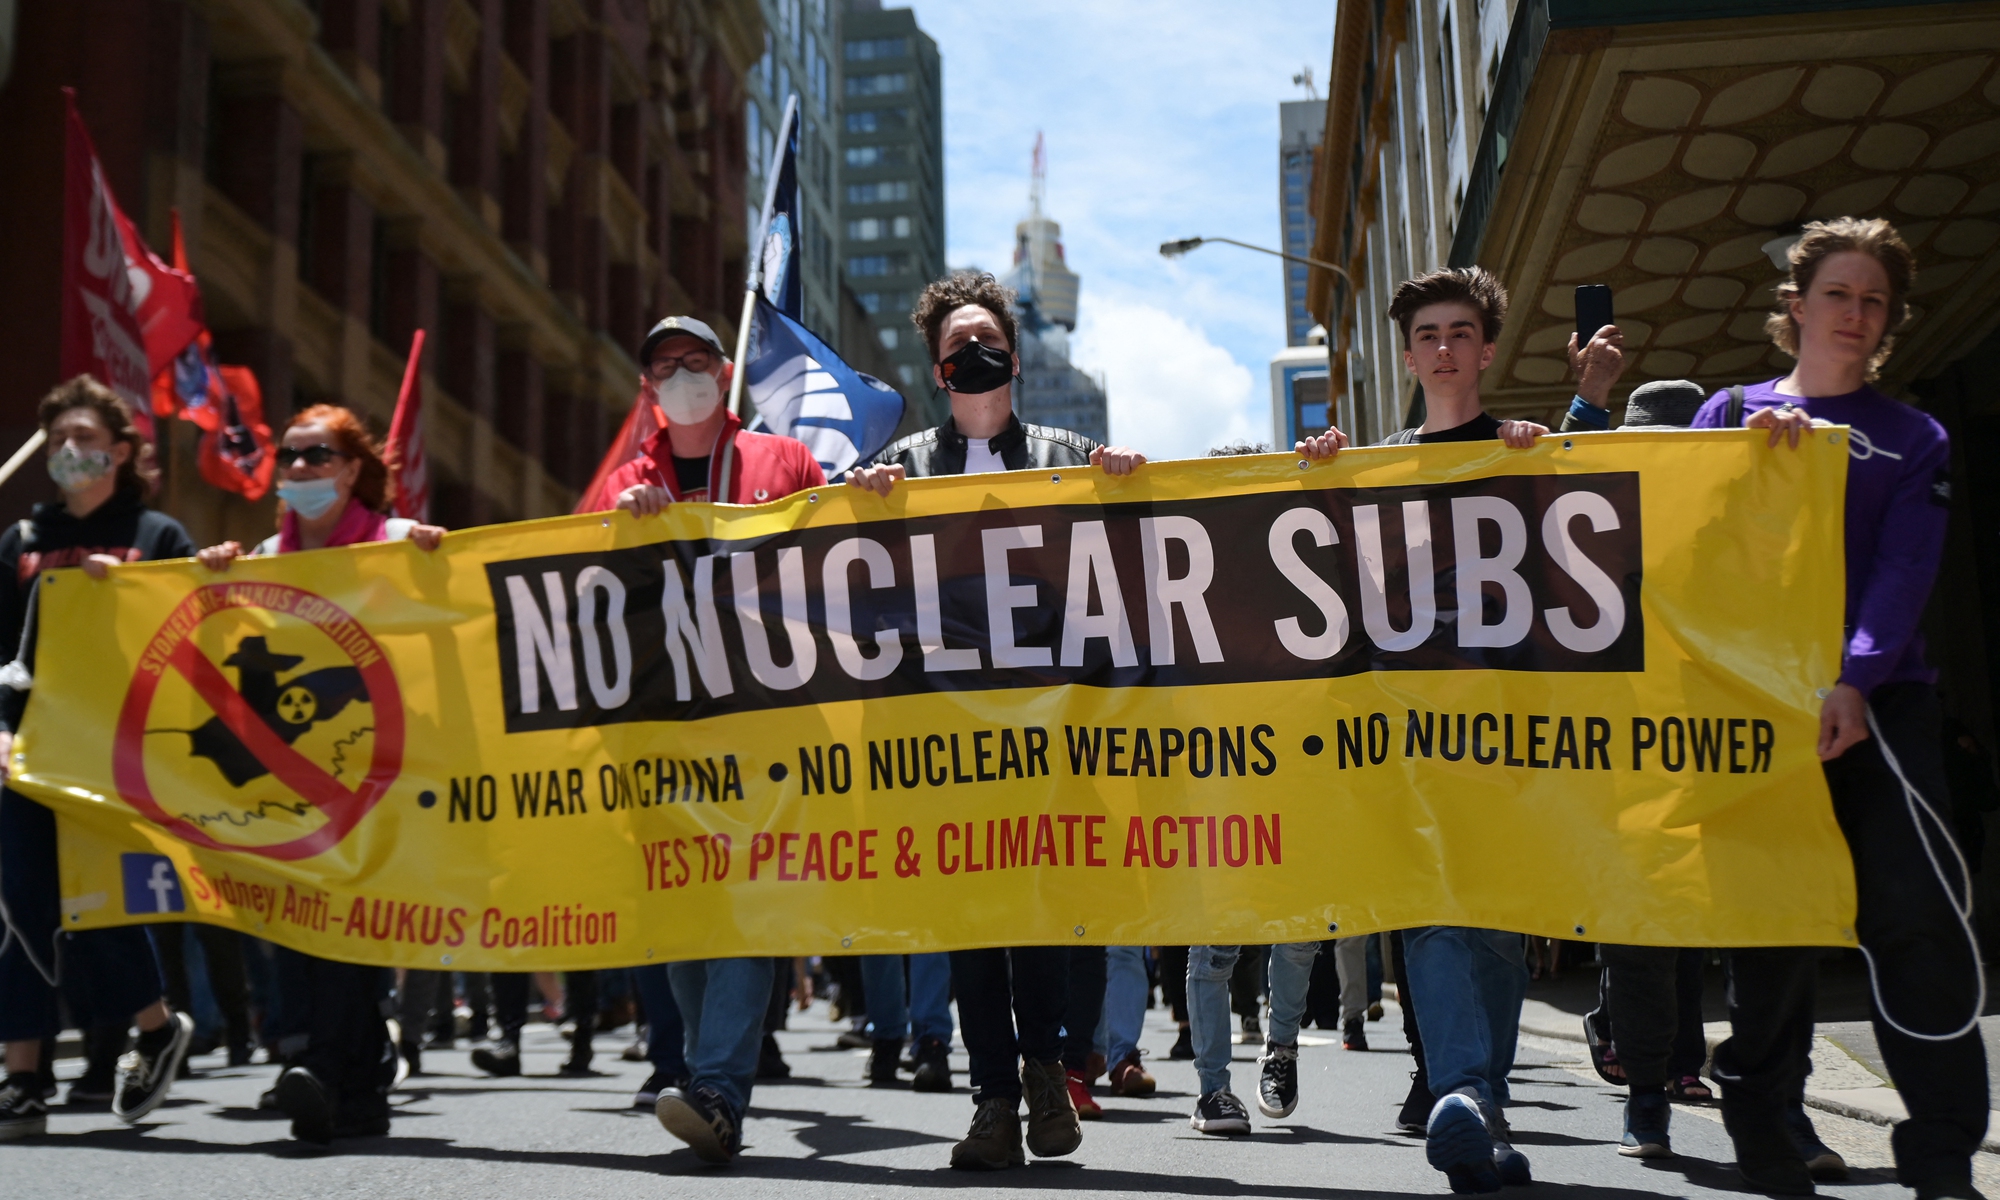 Members of the Sydney Anti-AUKUS Coalition (SAAC) participate in a protest in Sydney, Australia, on December 11, 2021 against the nuclear submarines deal among AUKUS members. Photo: AFP